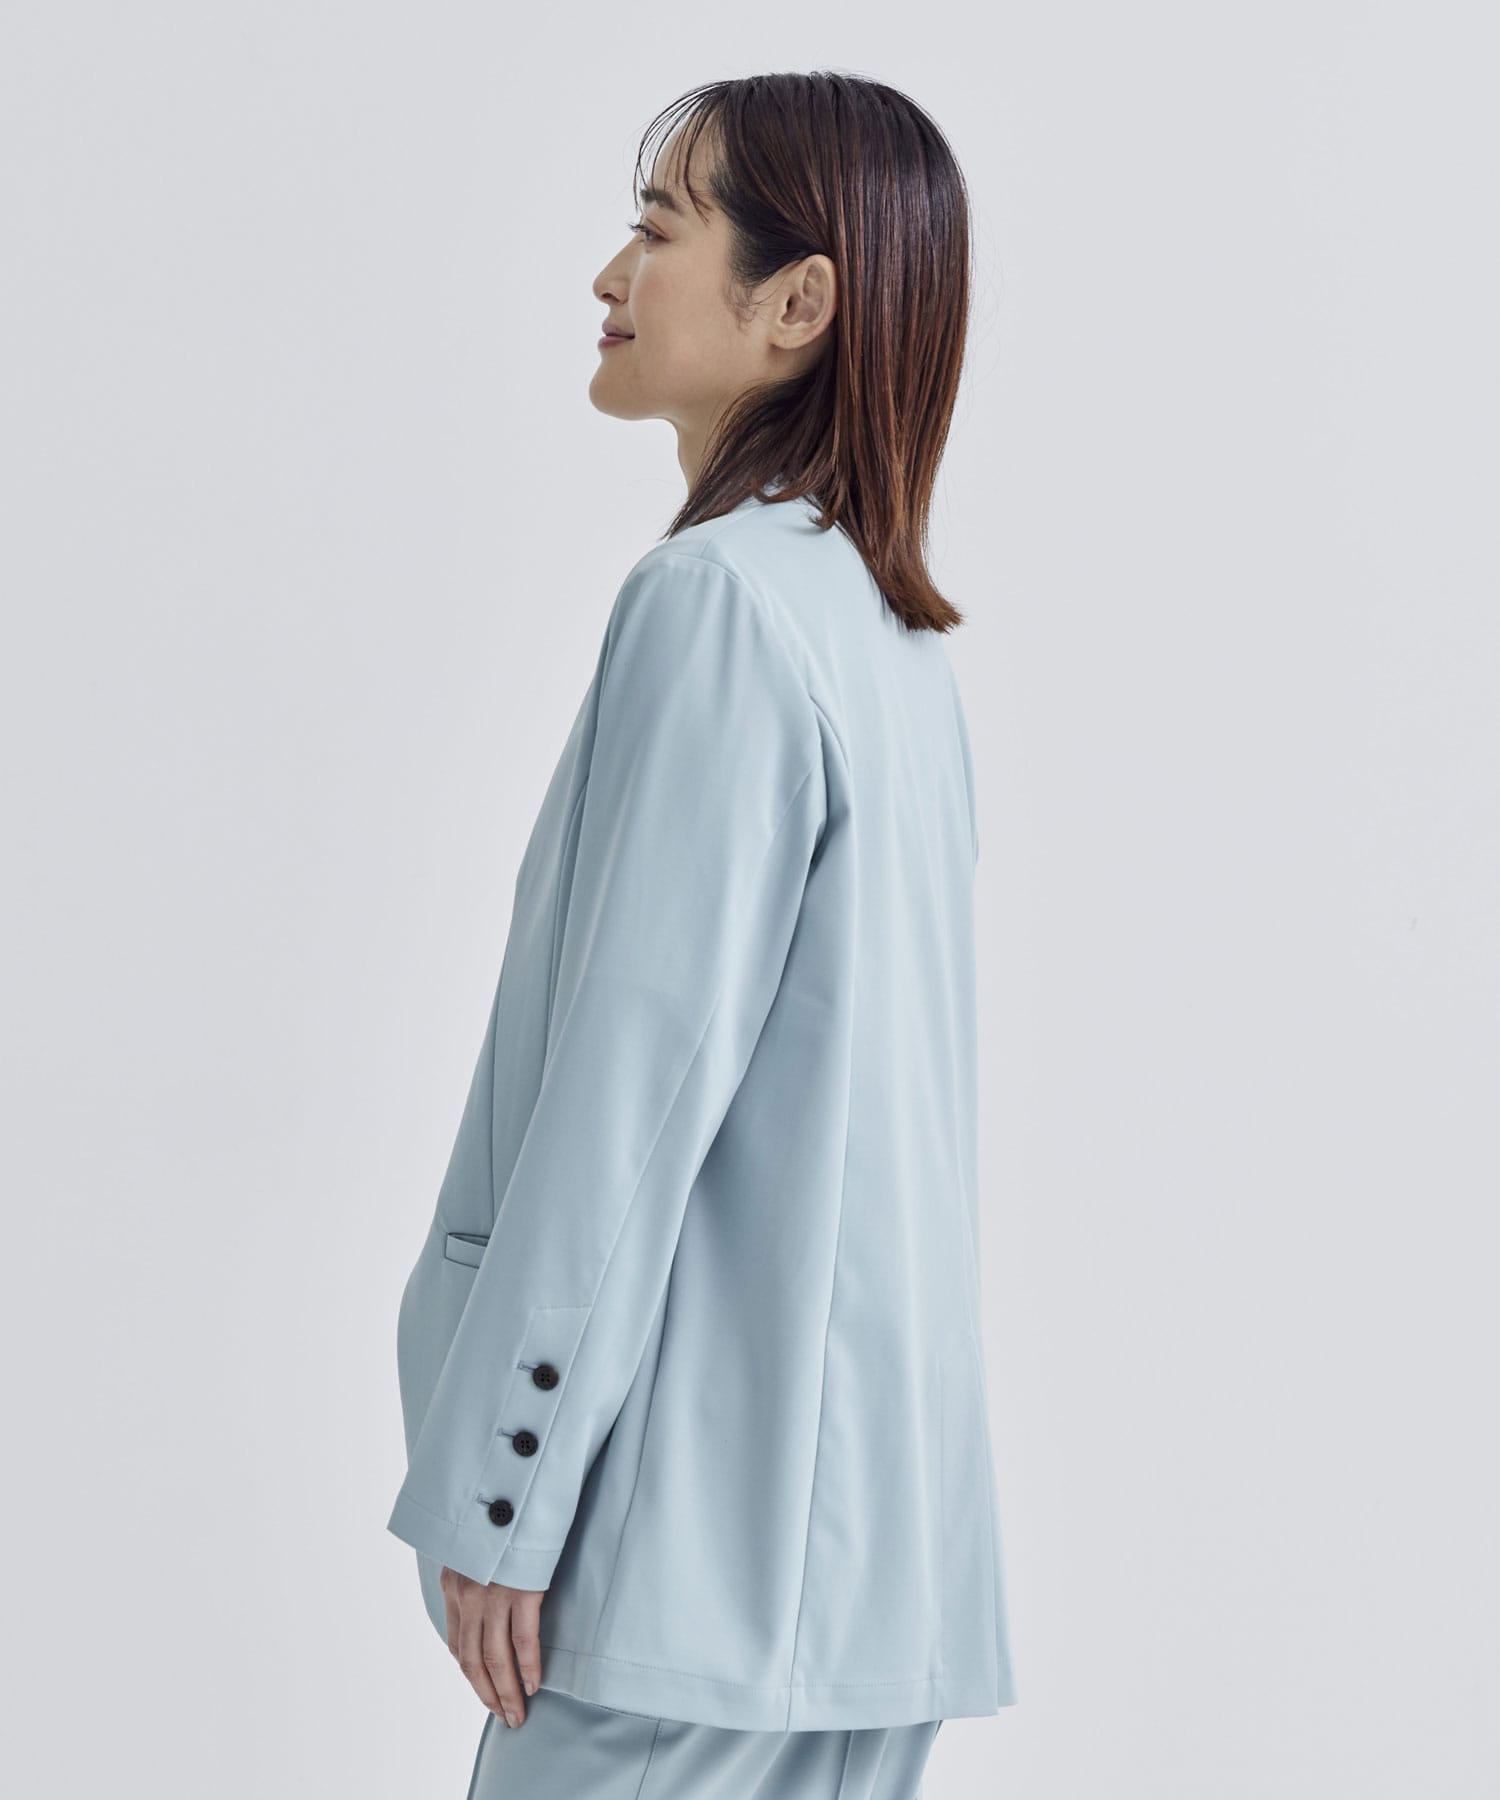 ULTRA LIGHT WASHABLE HIGH FANCTION JERSEY COLLARLESS JACKET THE PERMANENT EYE